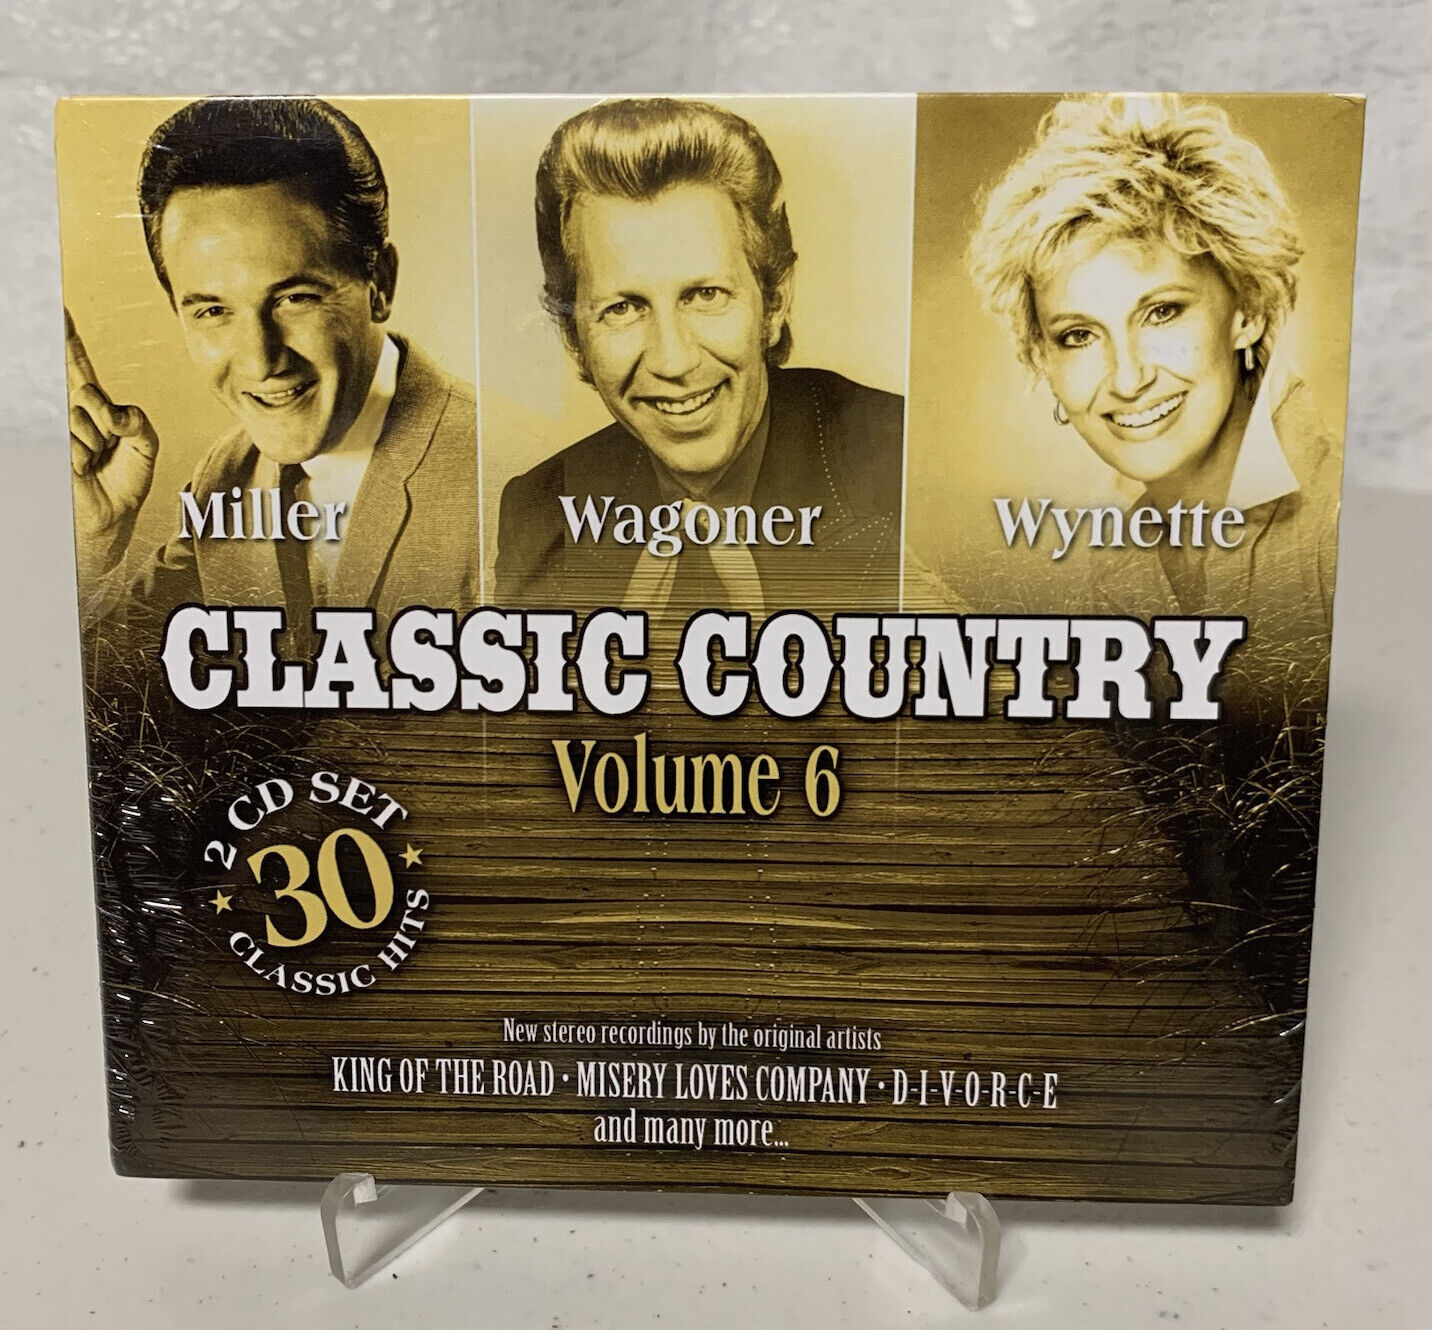 Classic Country CD Set Volume 6, 30 Classic Hits Tender Years King Of The Road